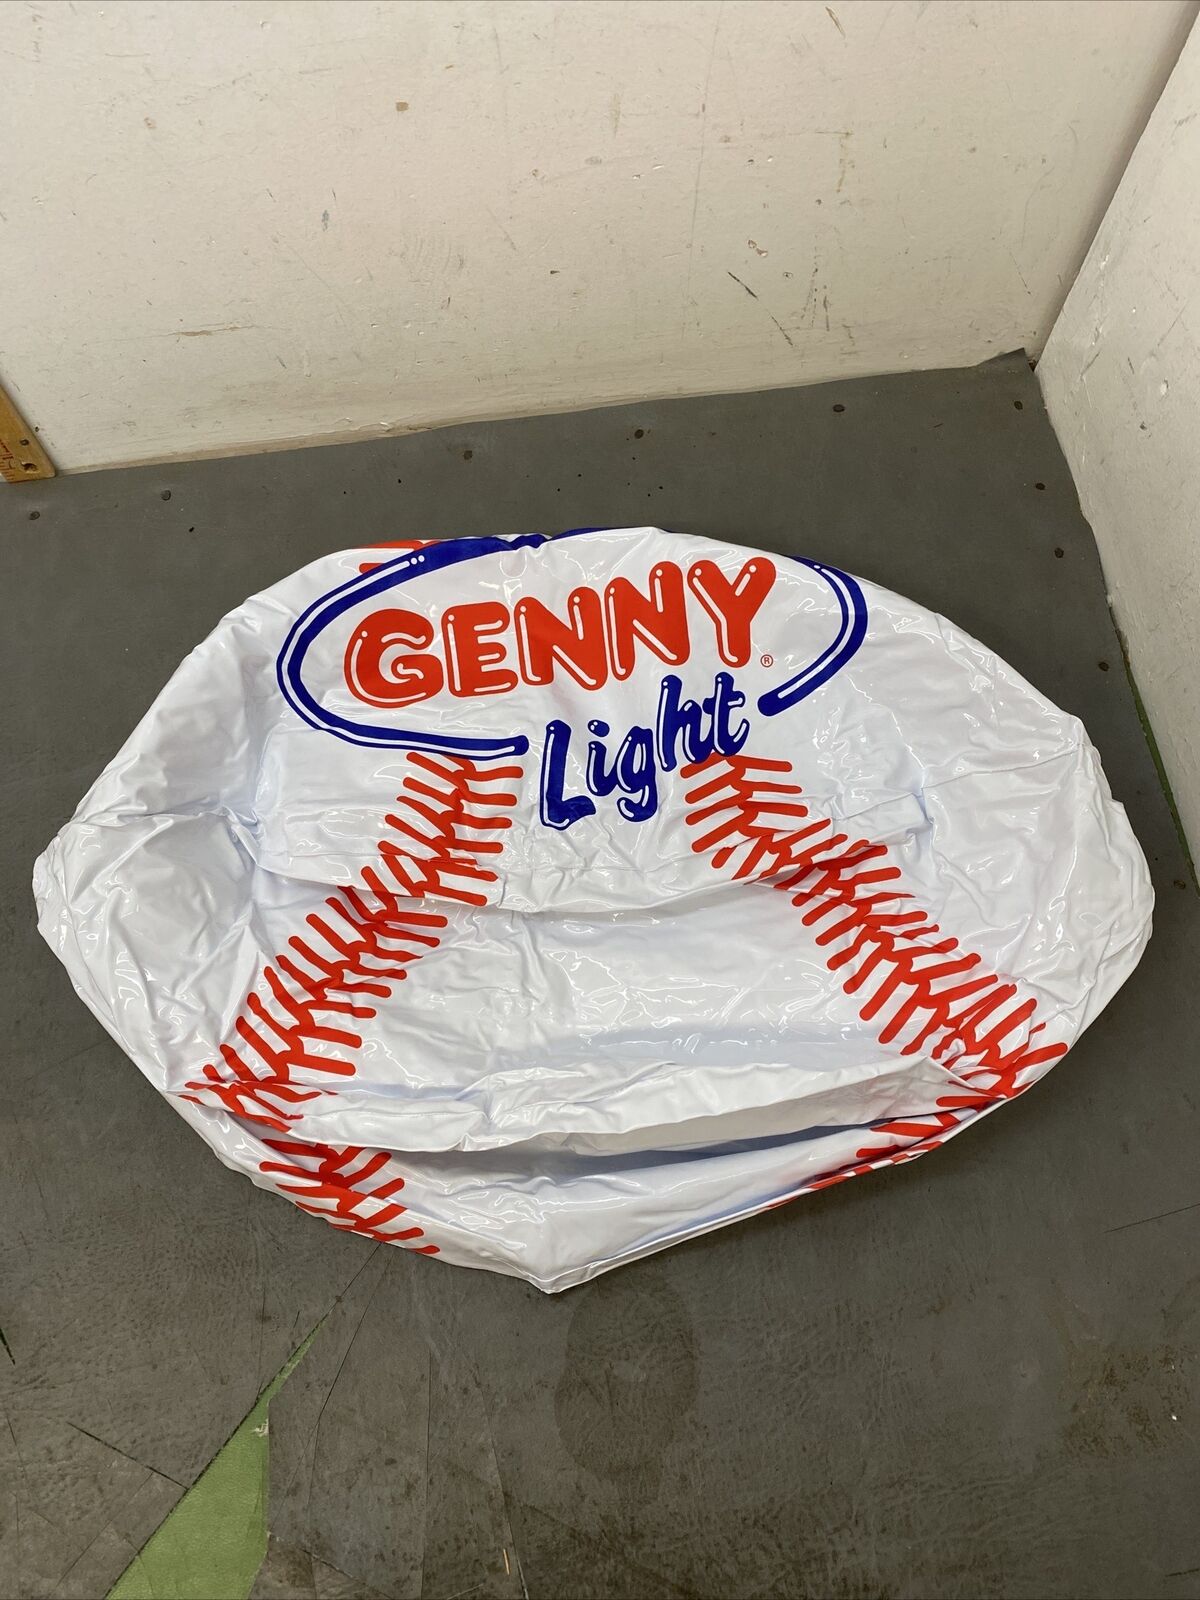 NOS Genny Light Beer Inflatable Baseball Never Used Brand New Bar Promo